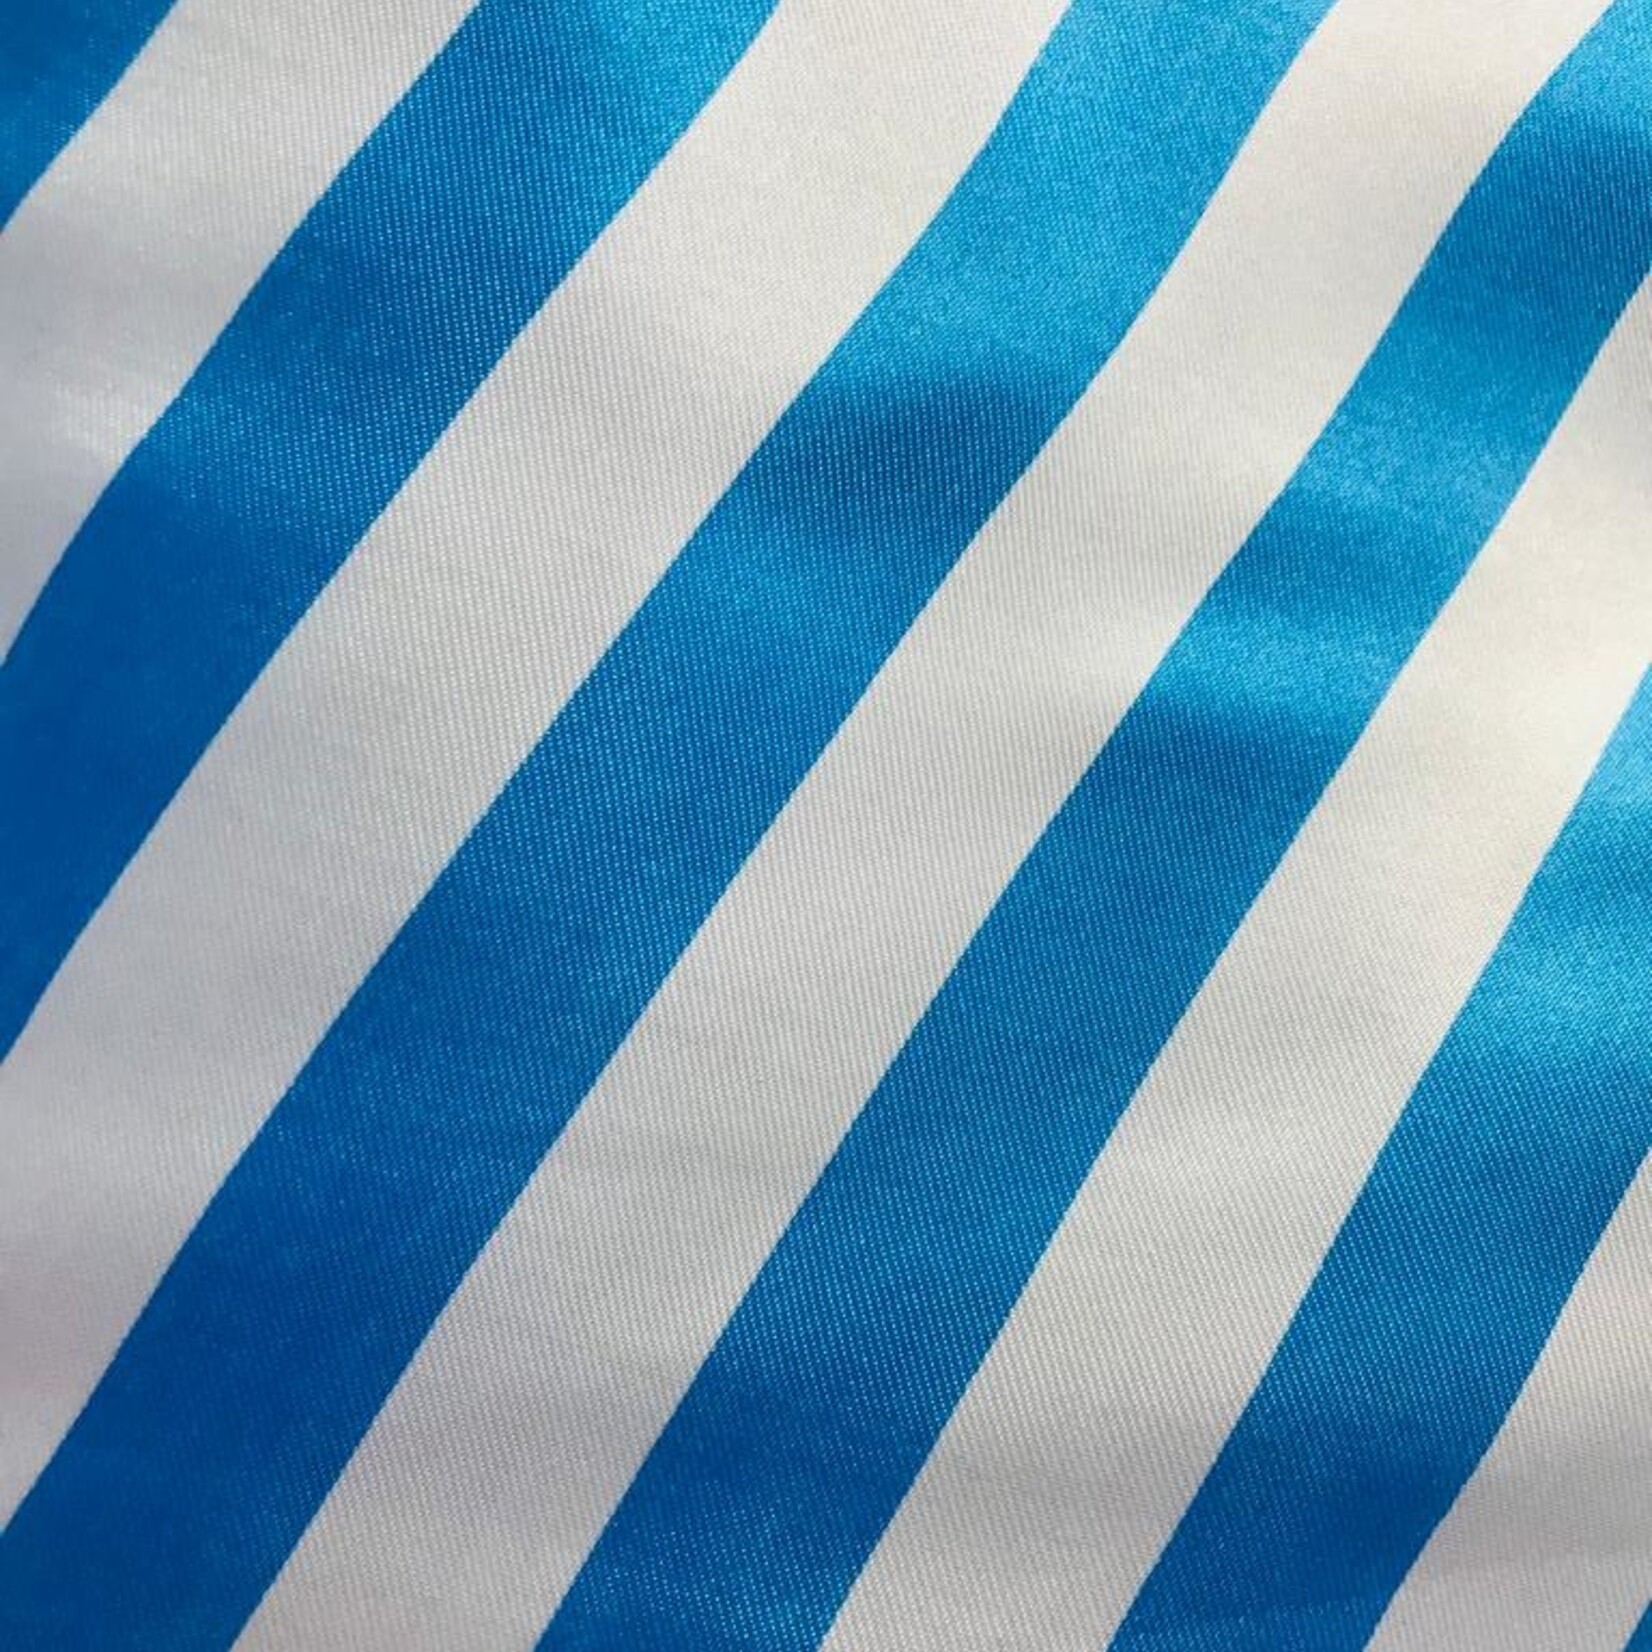 Satin Polyester 58 - 60 Inches Striped - White & Turquoise